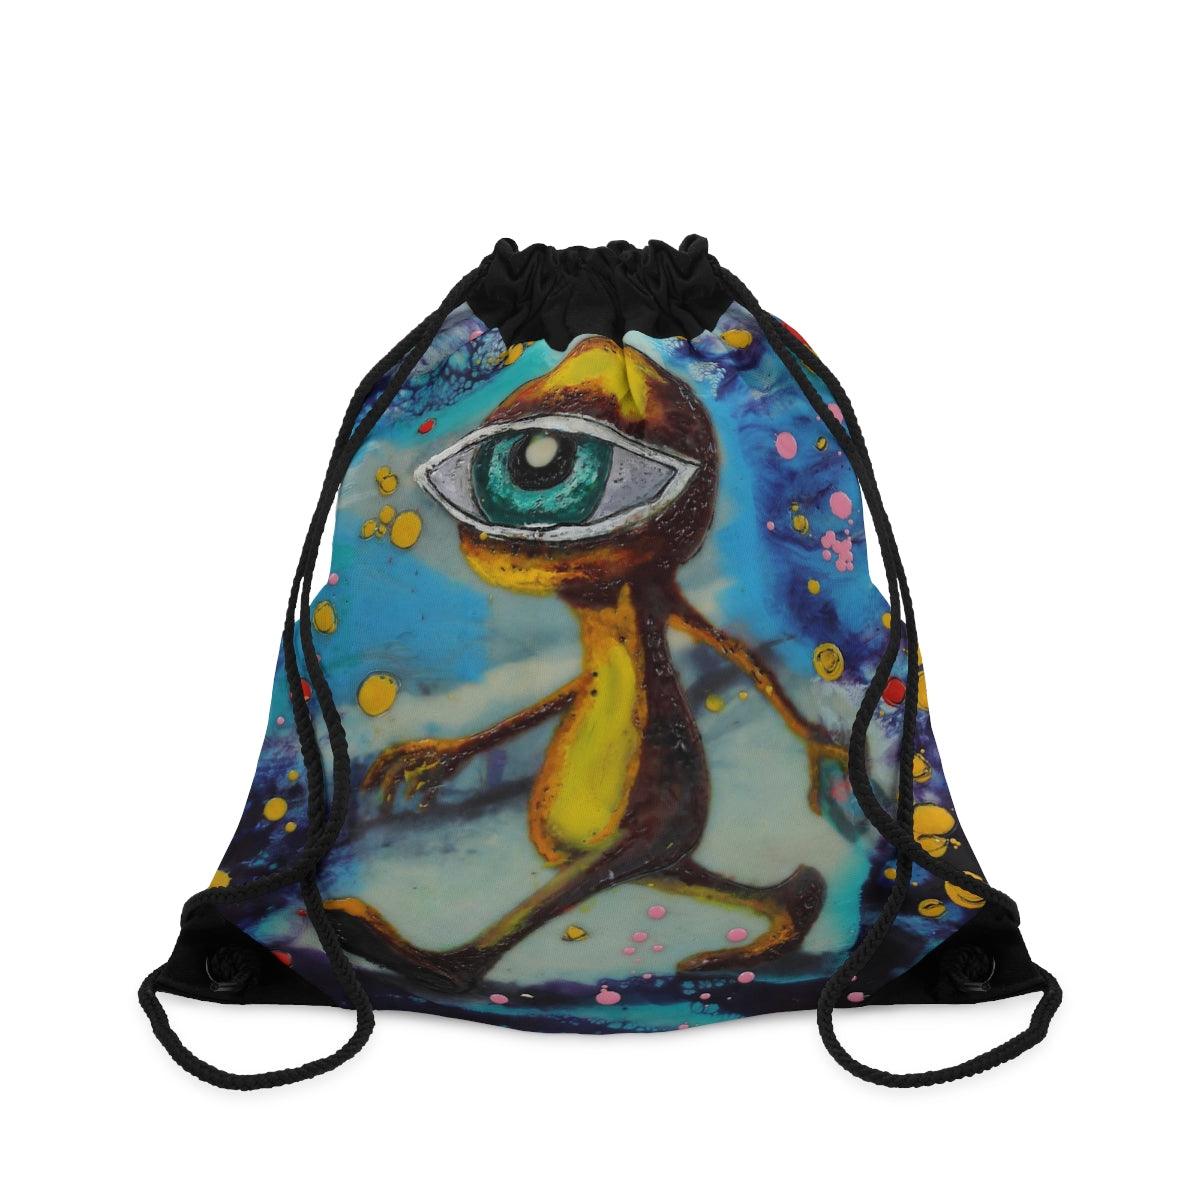 "I Took The Red Pill" Drawstring Bag-Bags - Mike Giannella - Encaustic Painting - Mixed Media Artist - Art Prints